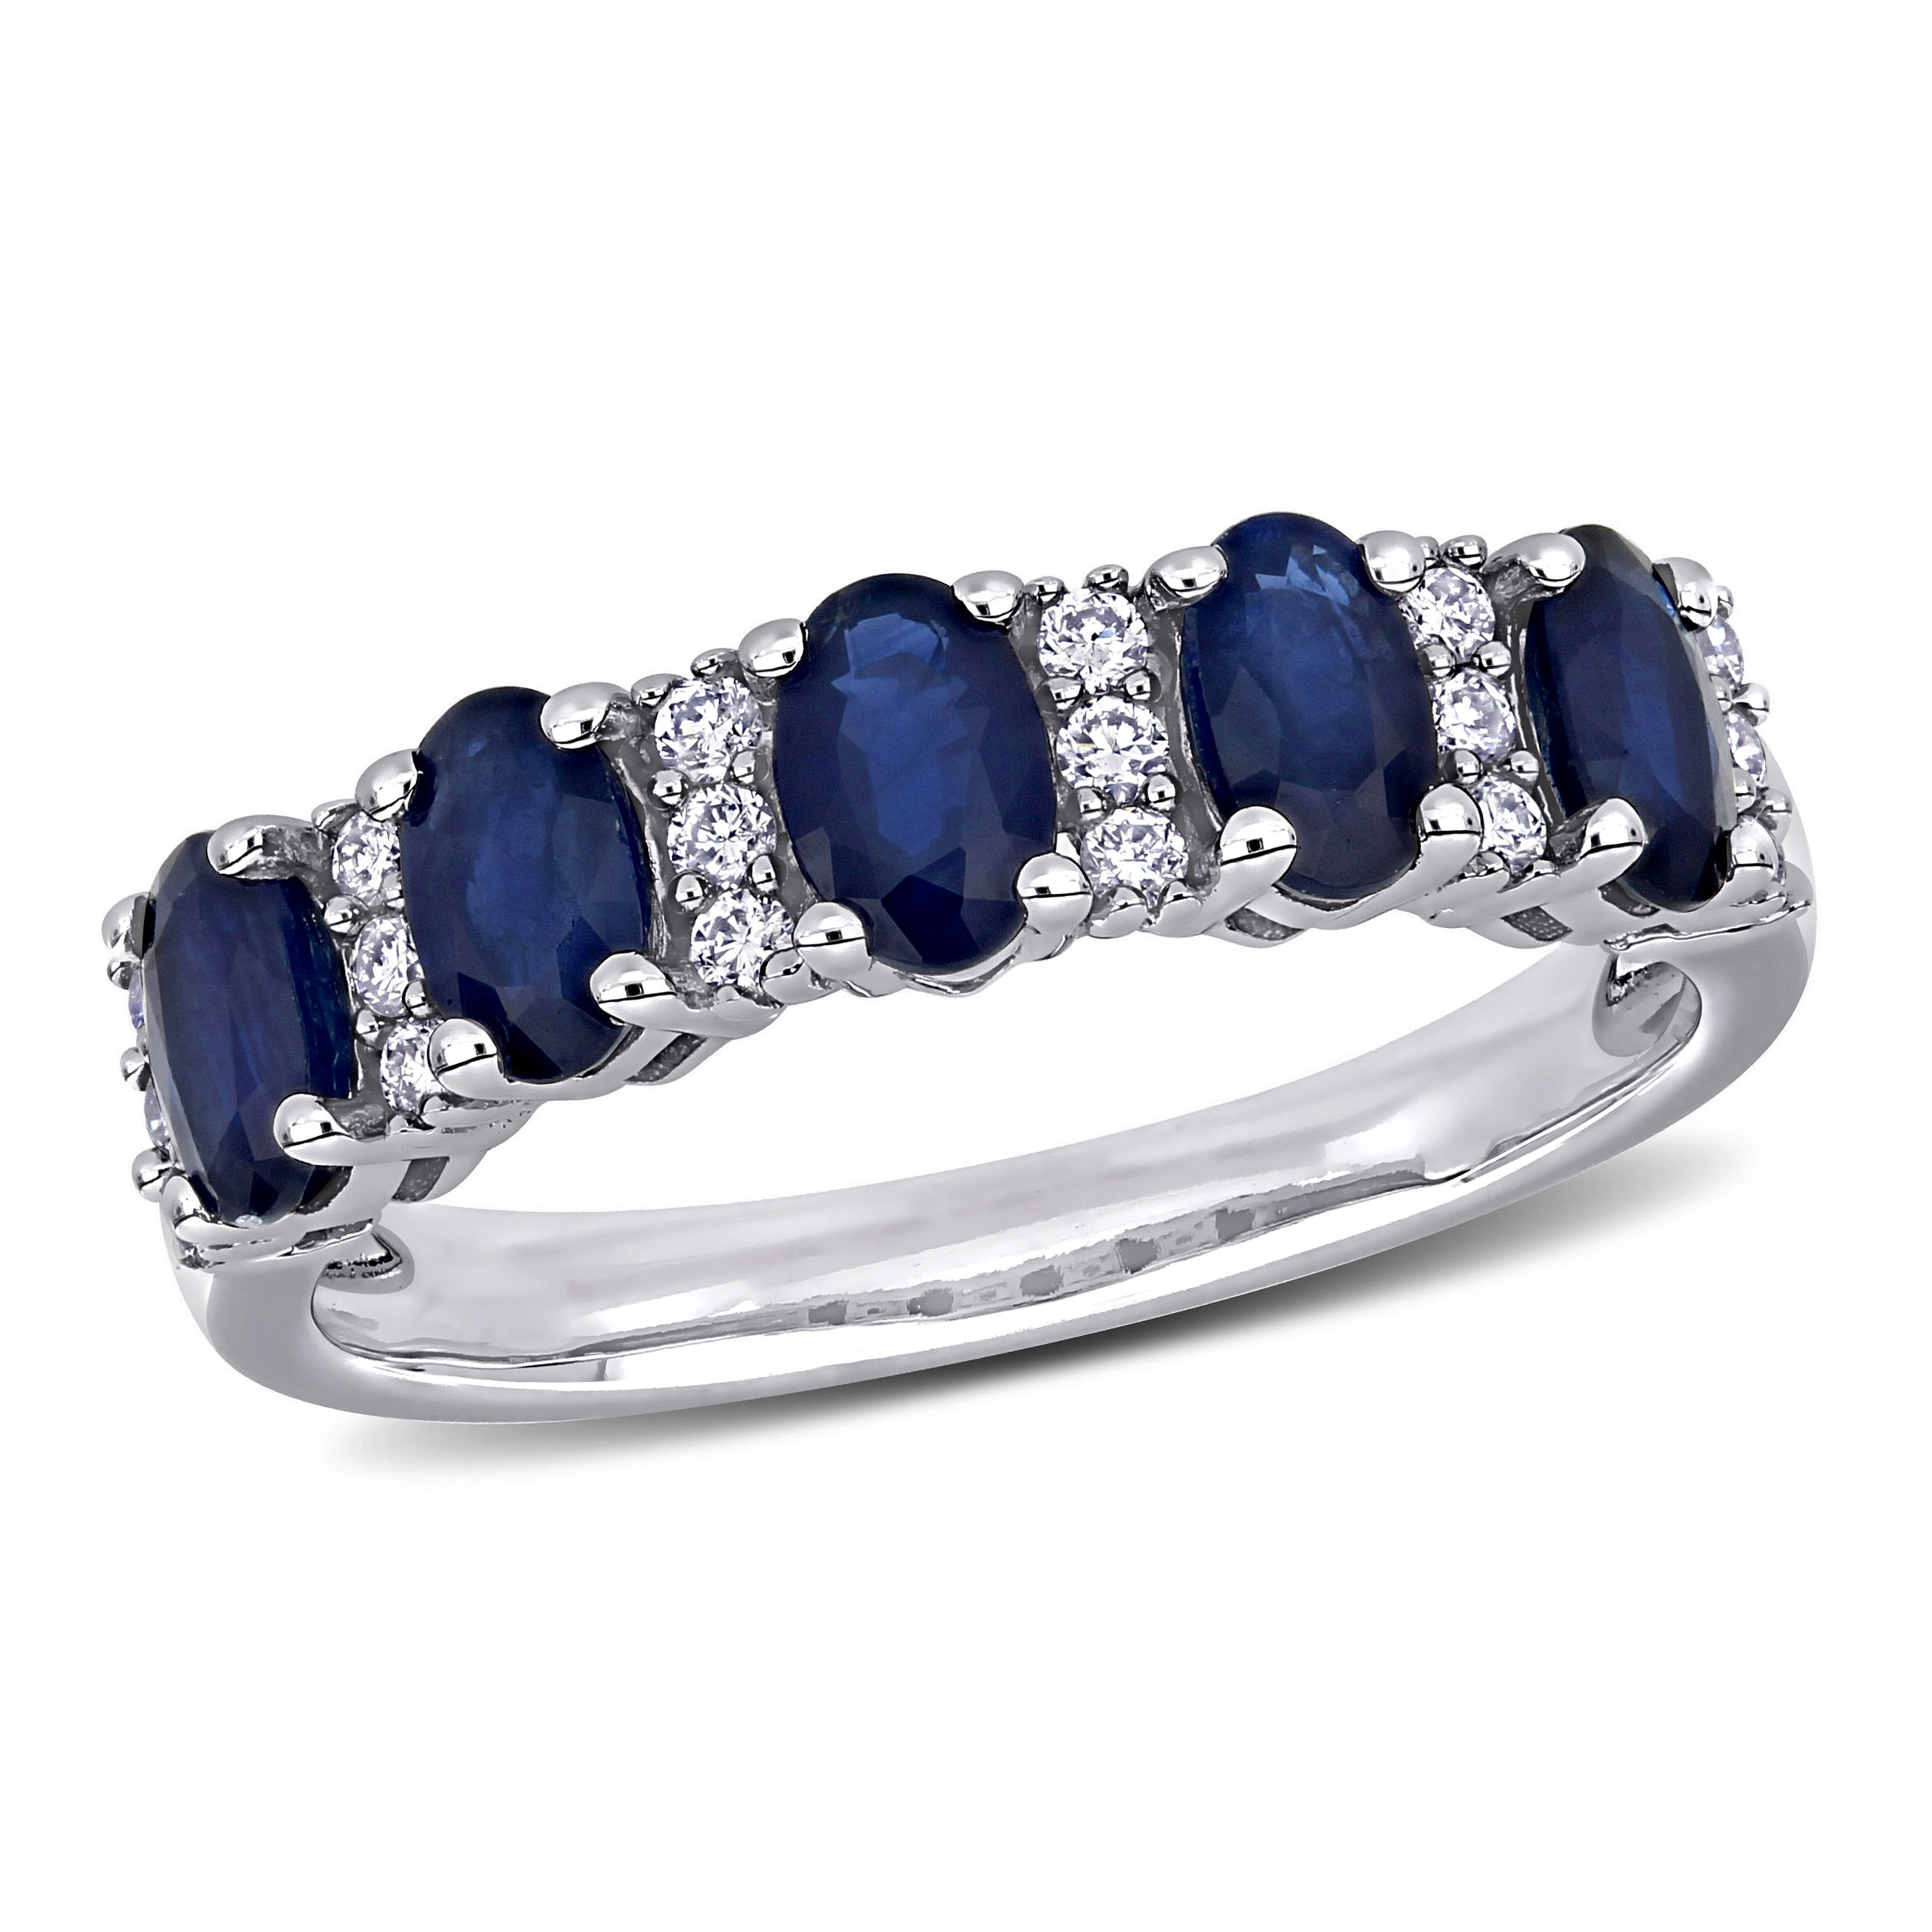 1 1/2 CT TGW Blue Sapphire and 1/6 CT TW Diamond Semi Eternity Ring in 14k White Gold